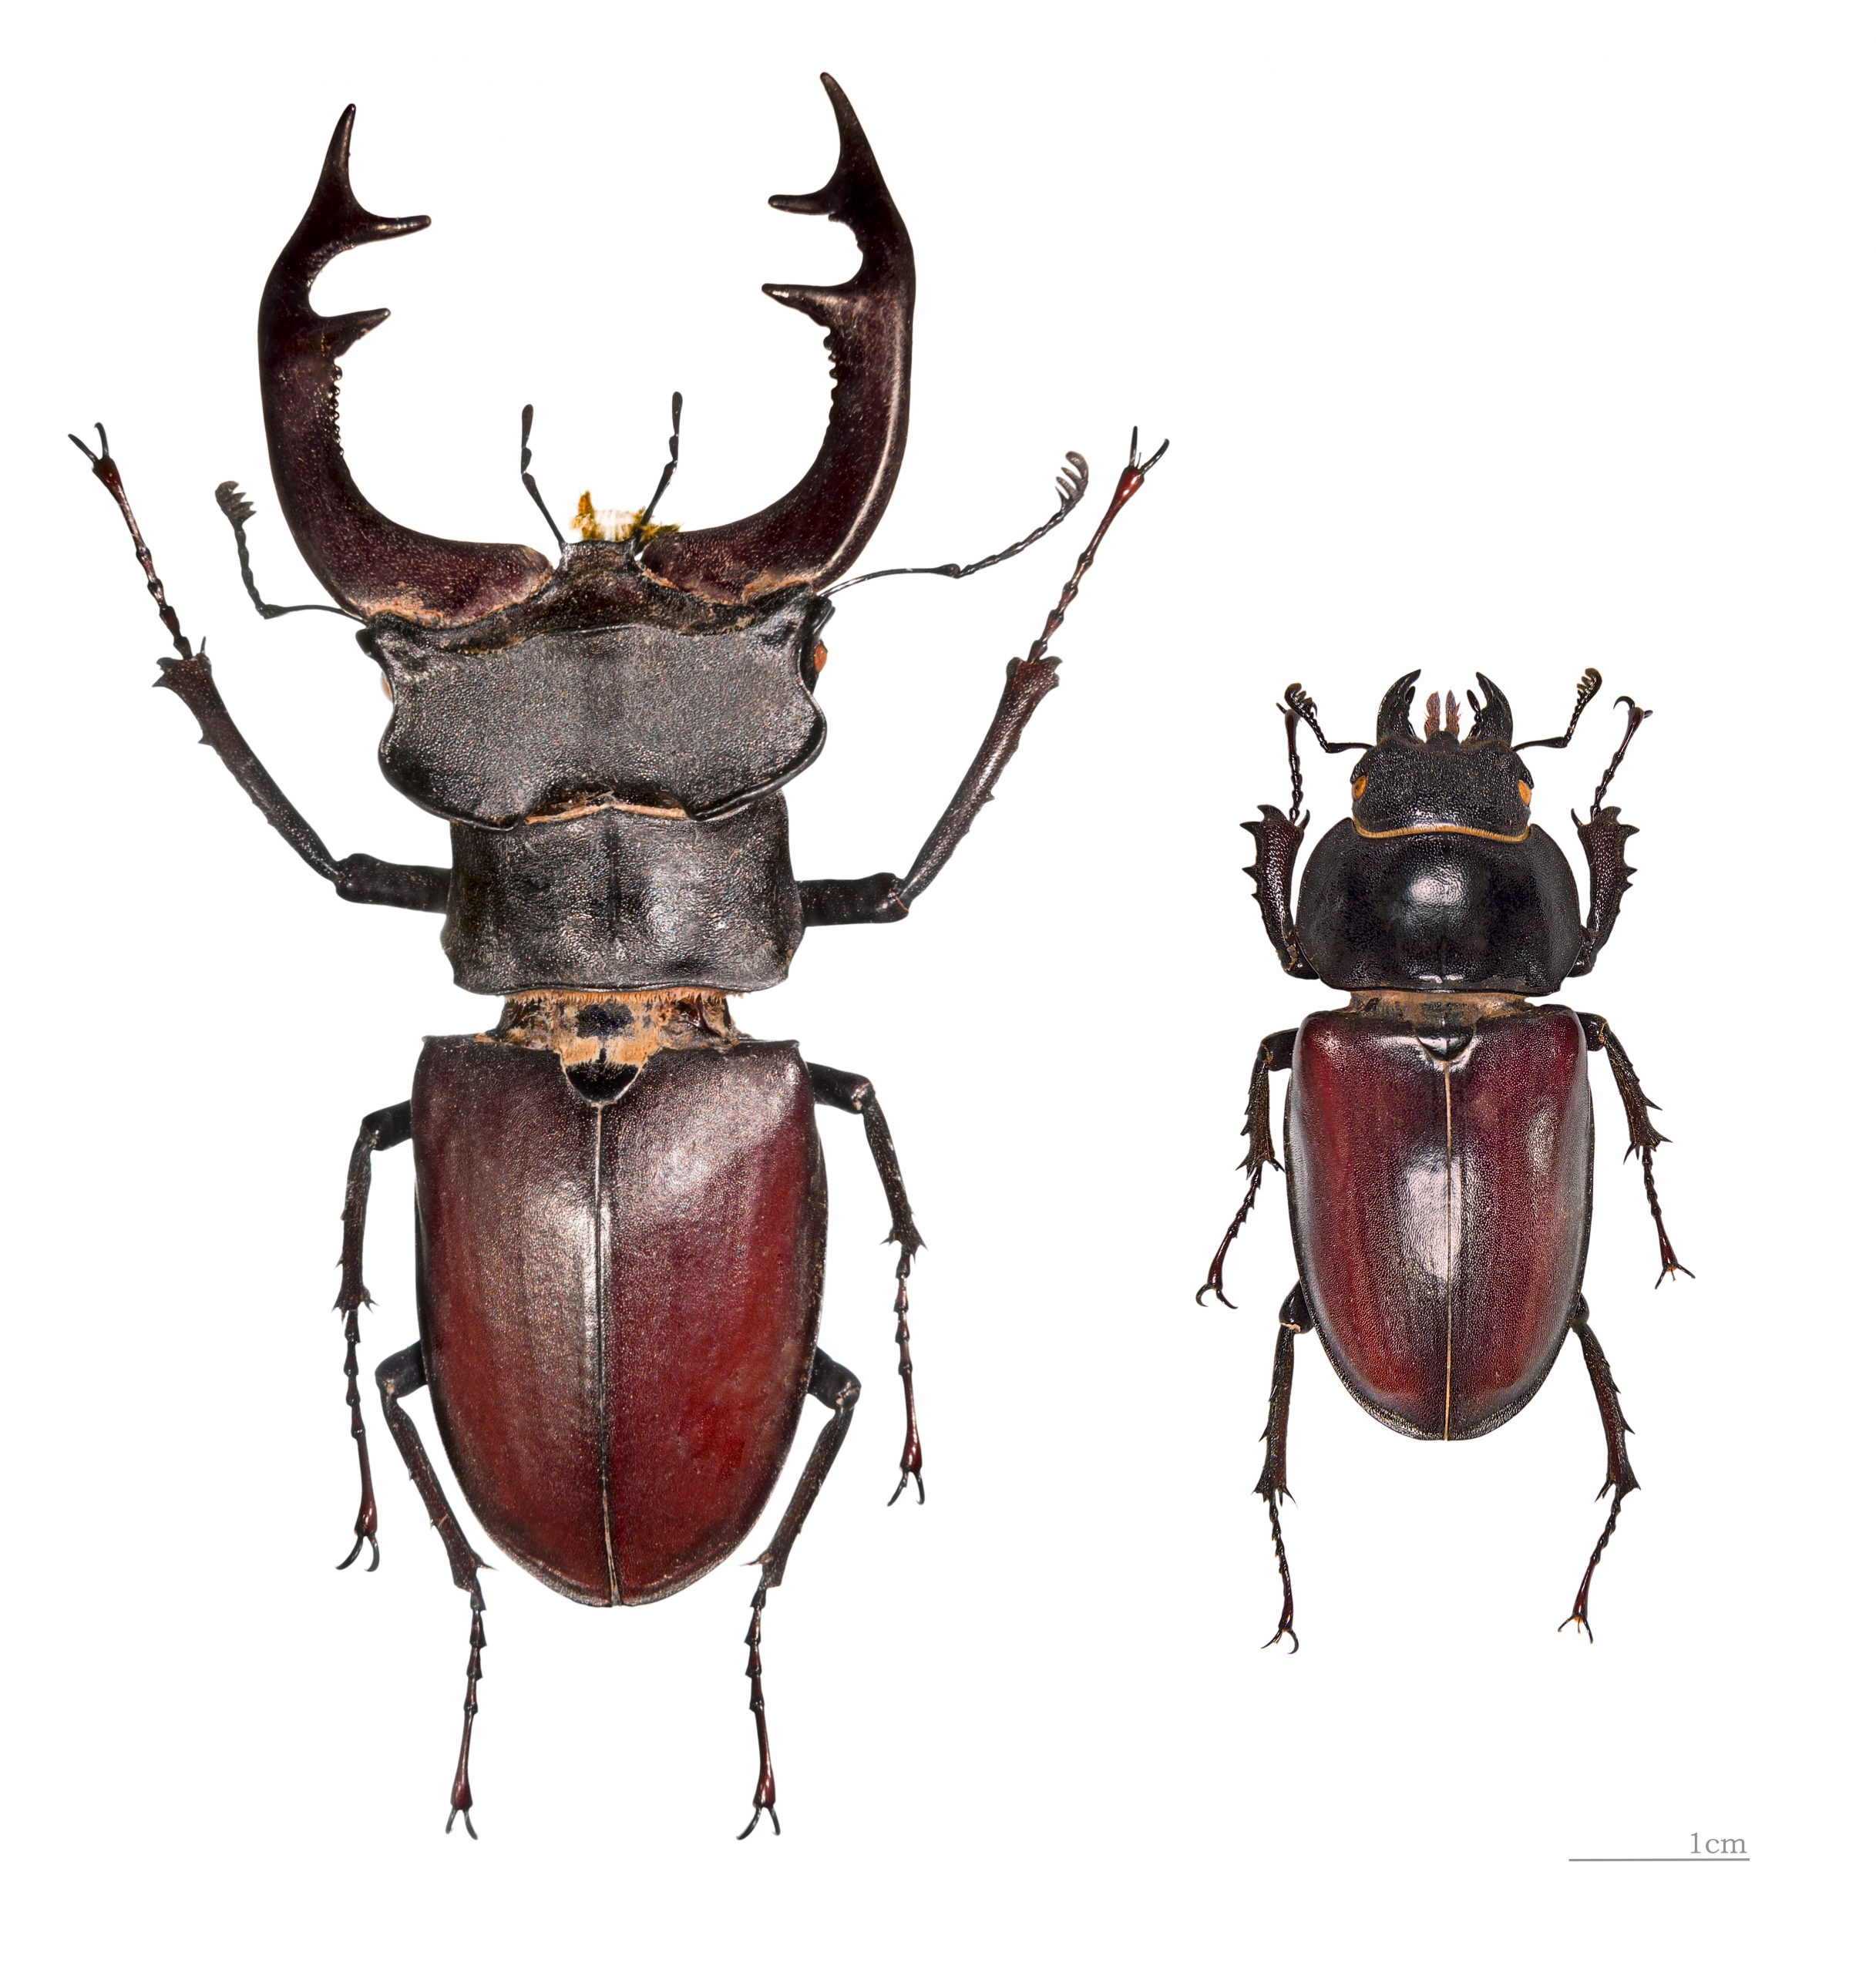 Photo depicts stag beetles